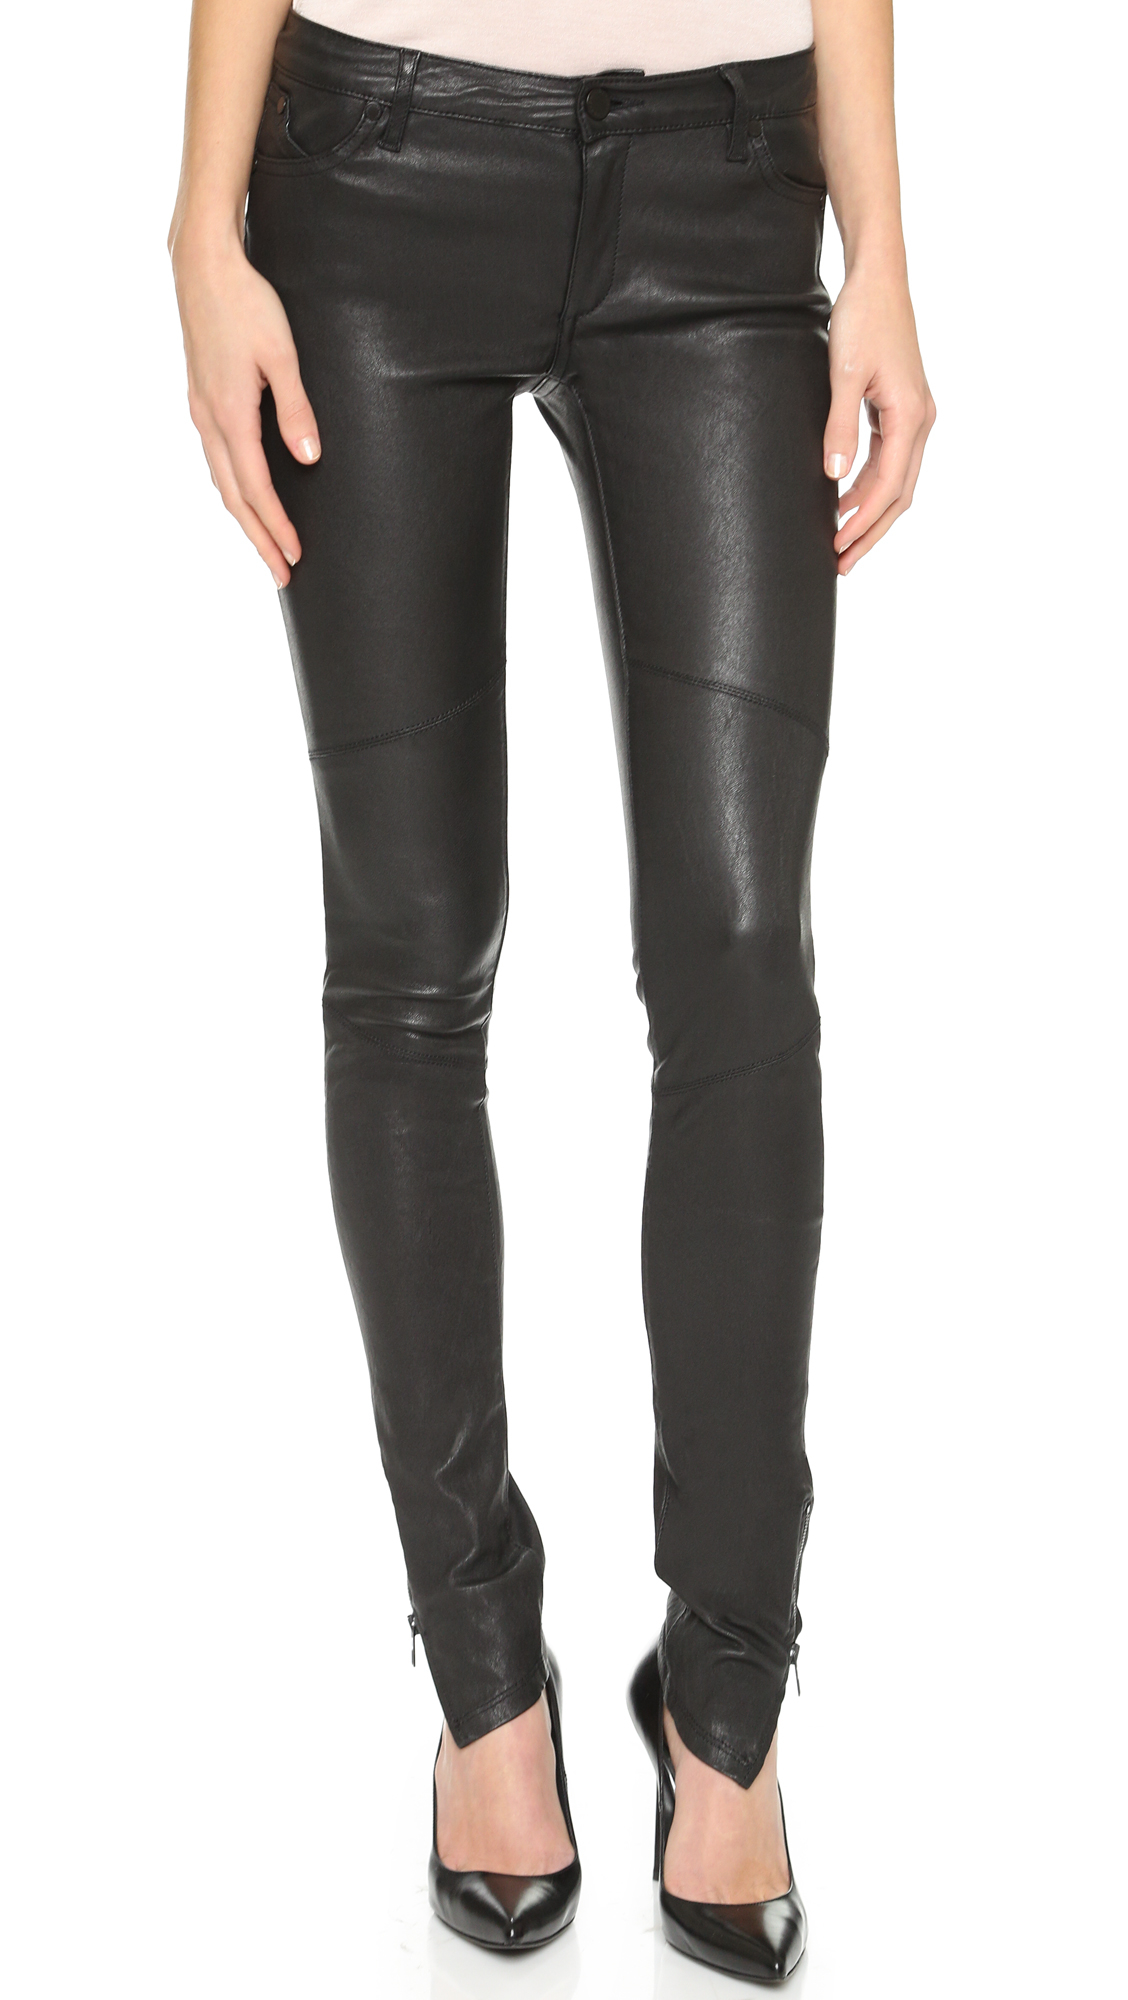 Lyst - Superfine Rebel Luxe Stretch Leather Pants in Black